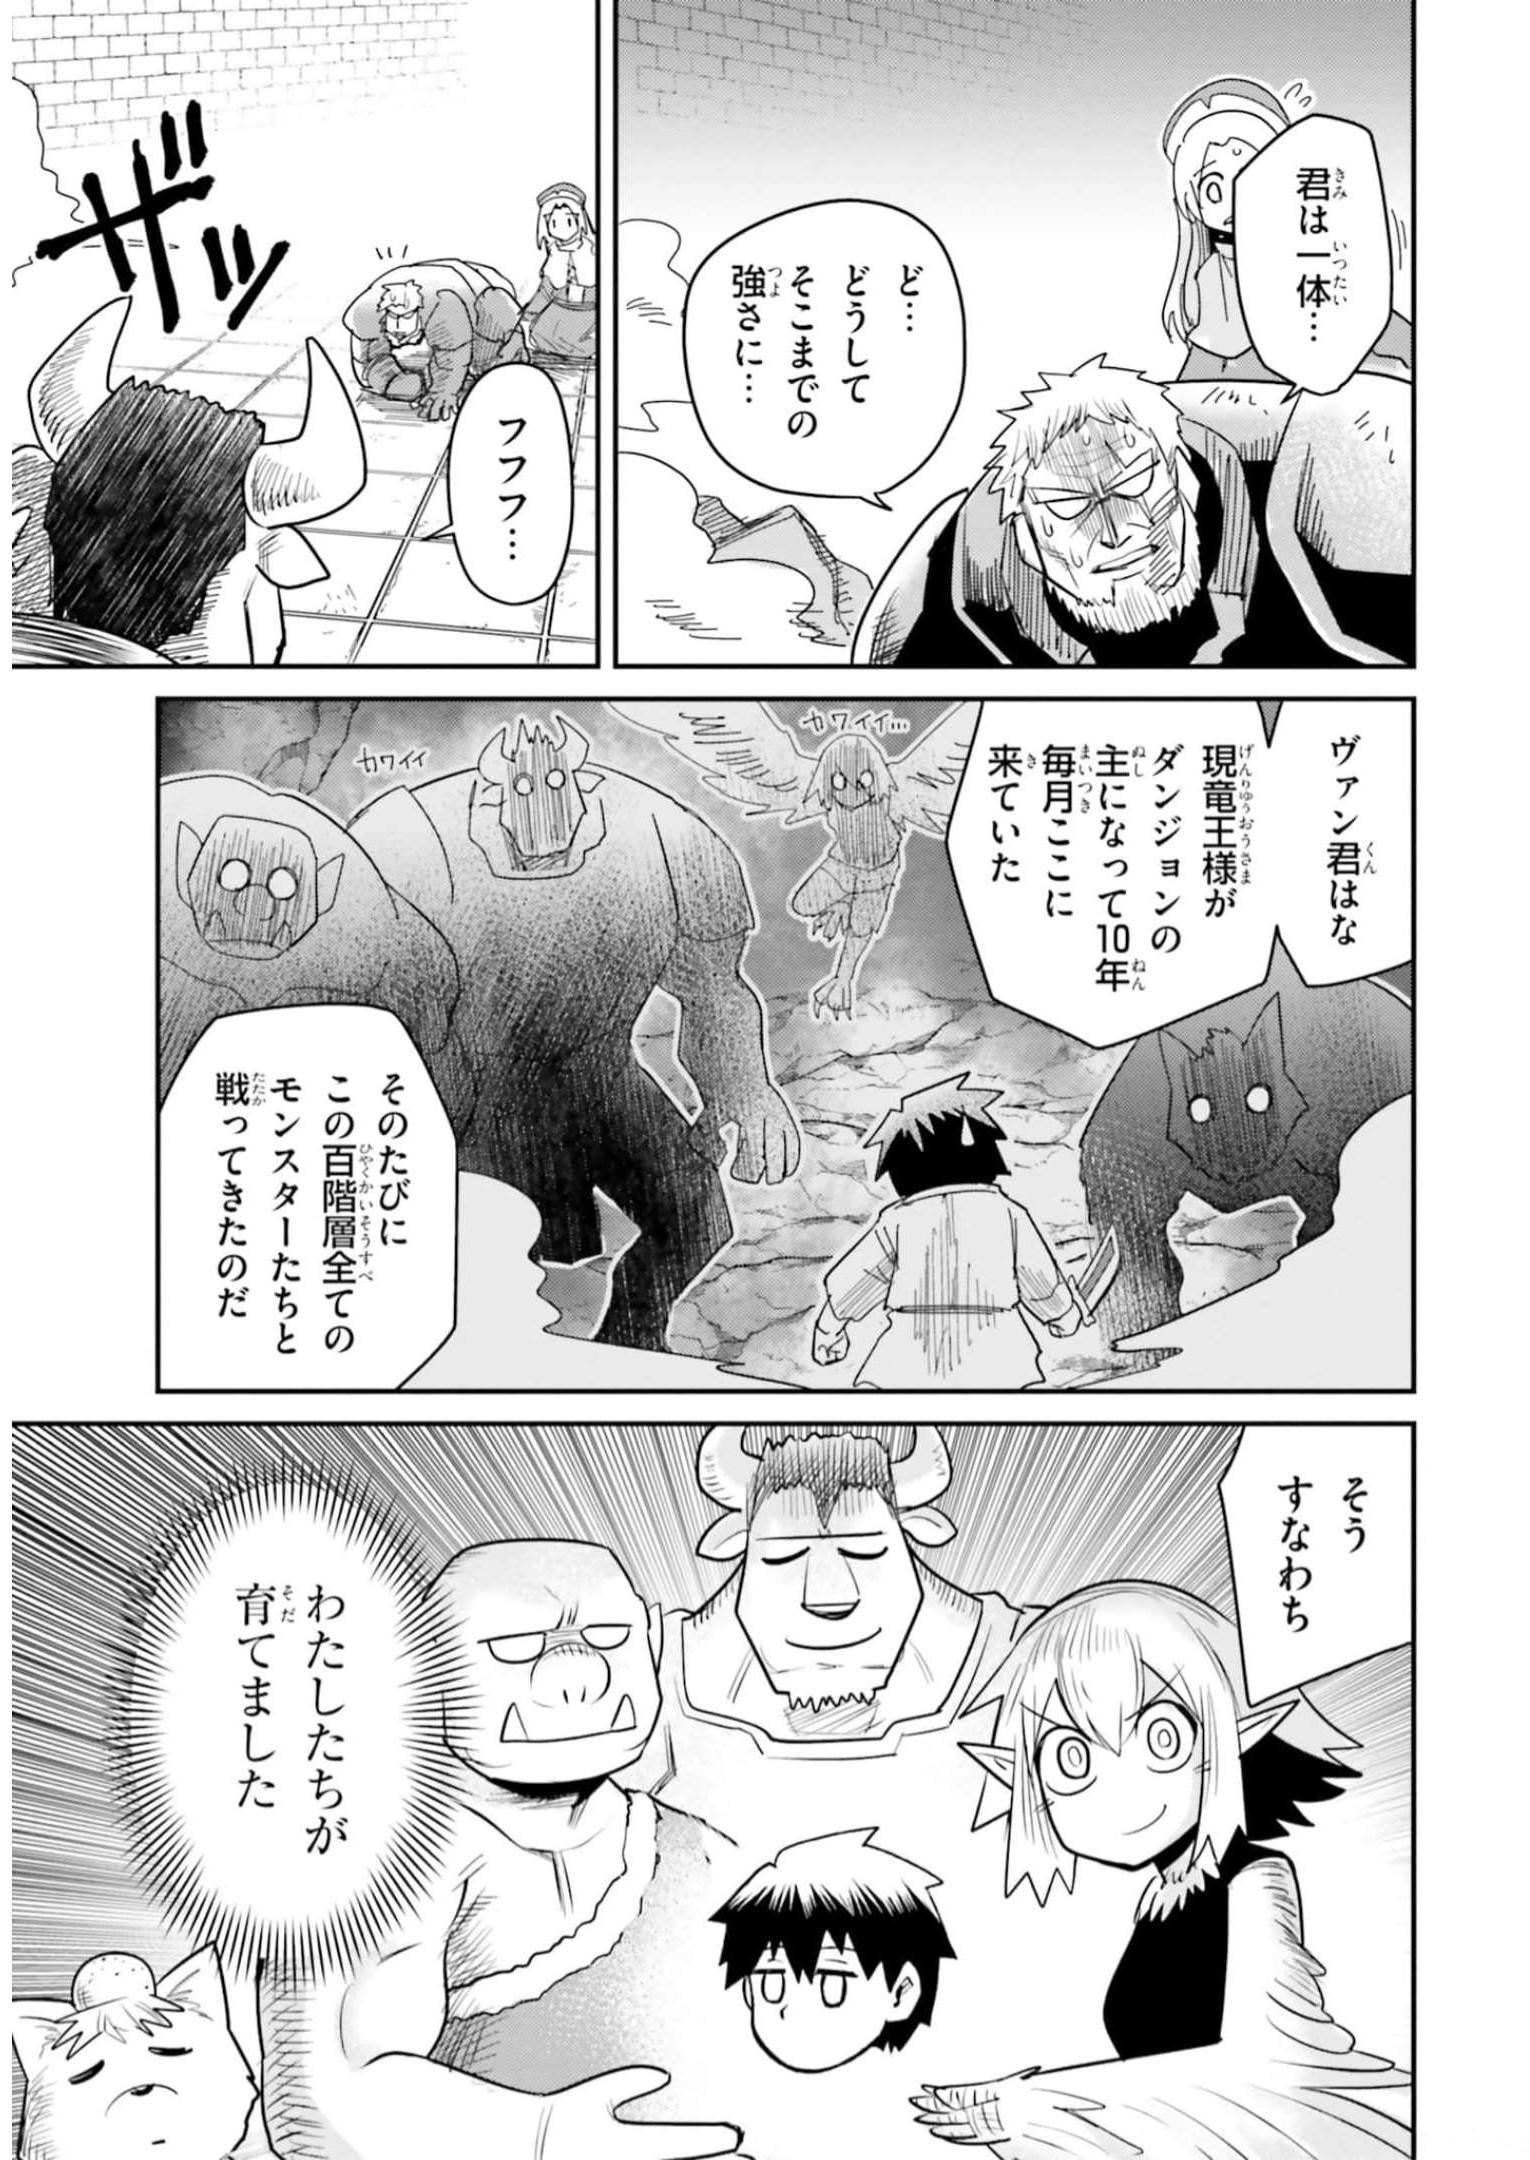 Dungeon Friends Forever Dungeon’s Childhood Friend ダンジョンの幼なじみ 第9話 - Page 17